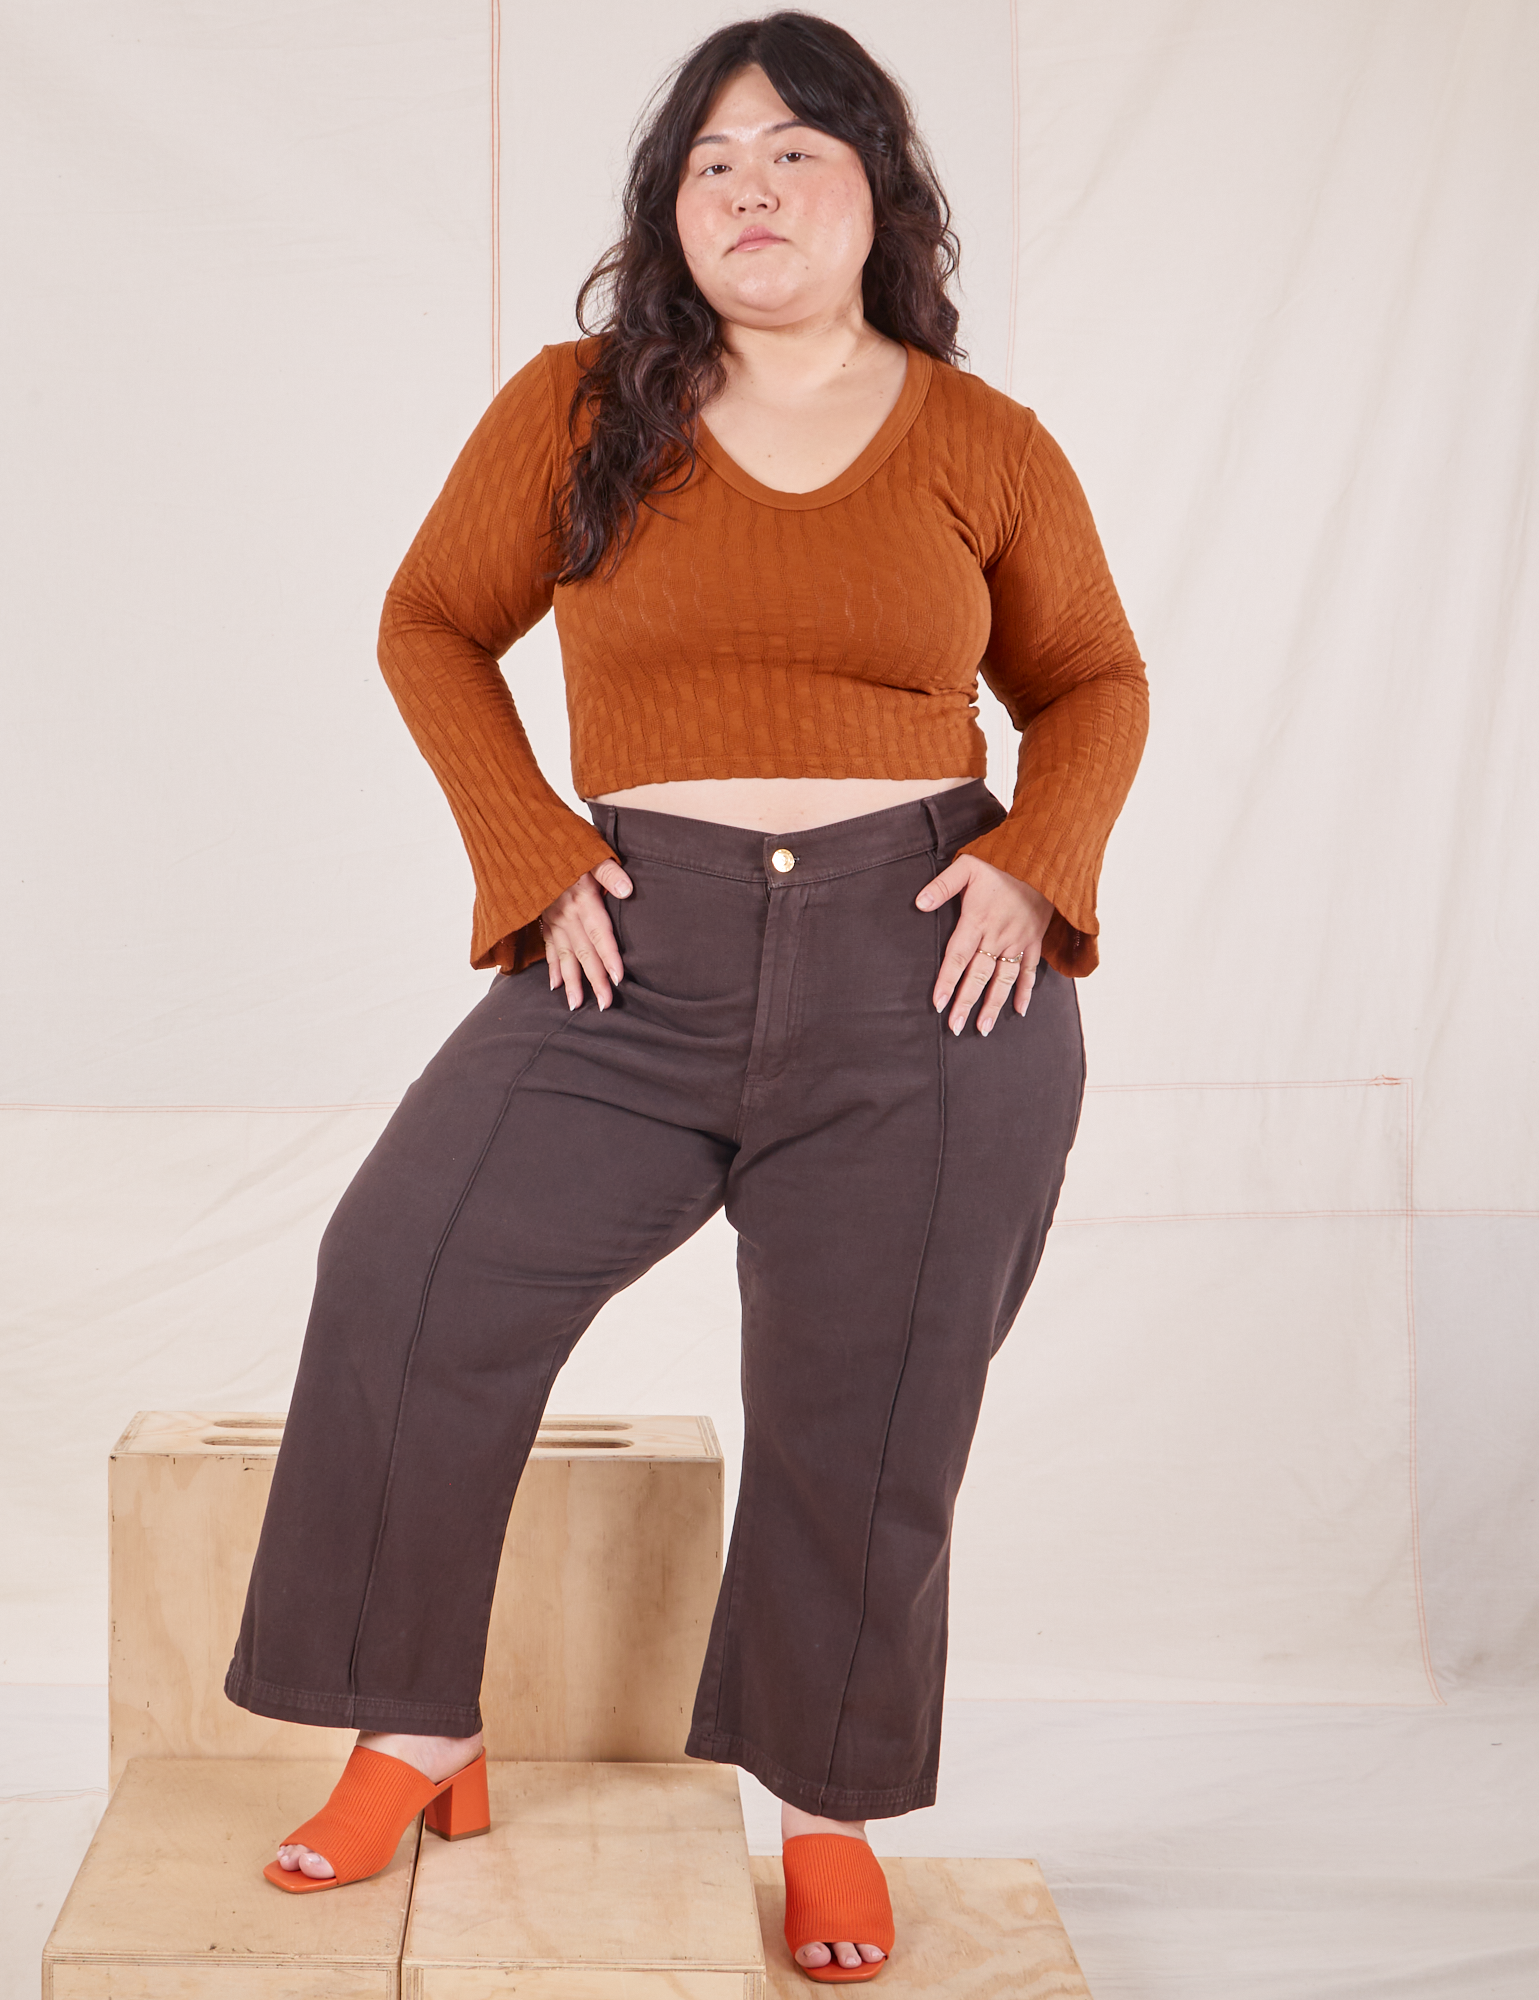 Ashley is wearing Bell Sleeve Top in Burnt Terracotta and espresso brown Western Pants